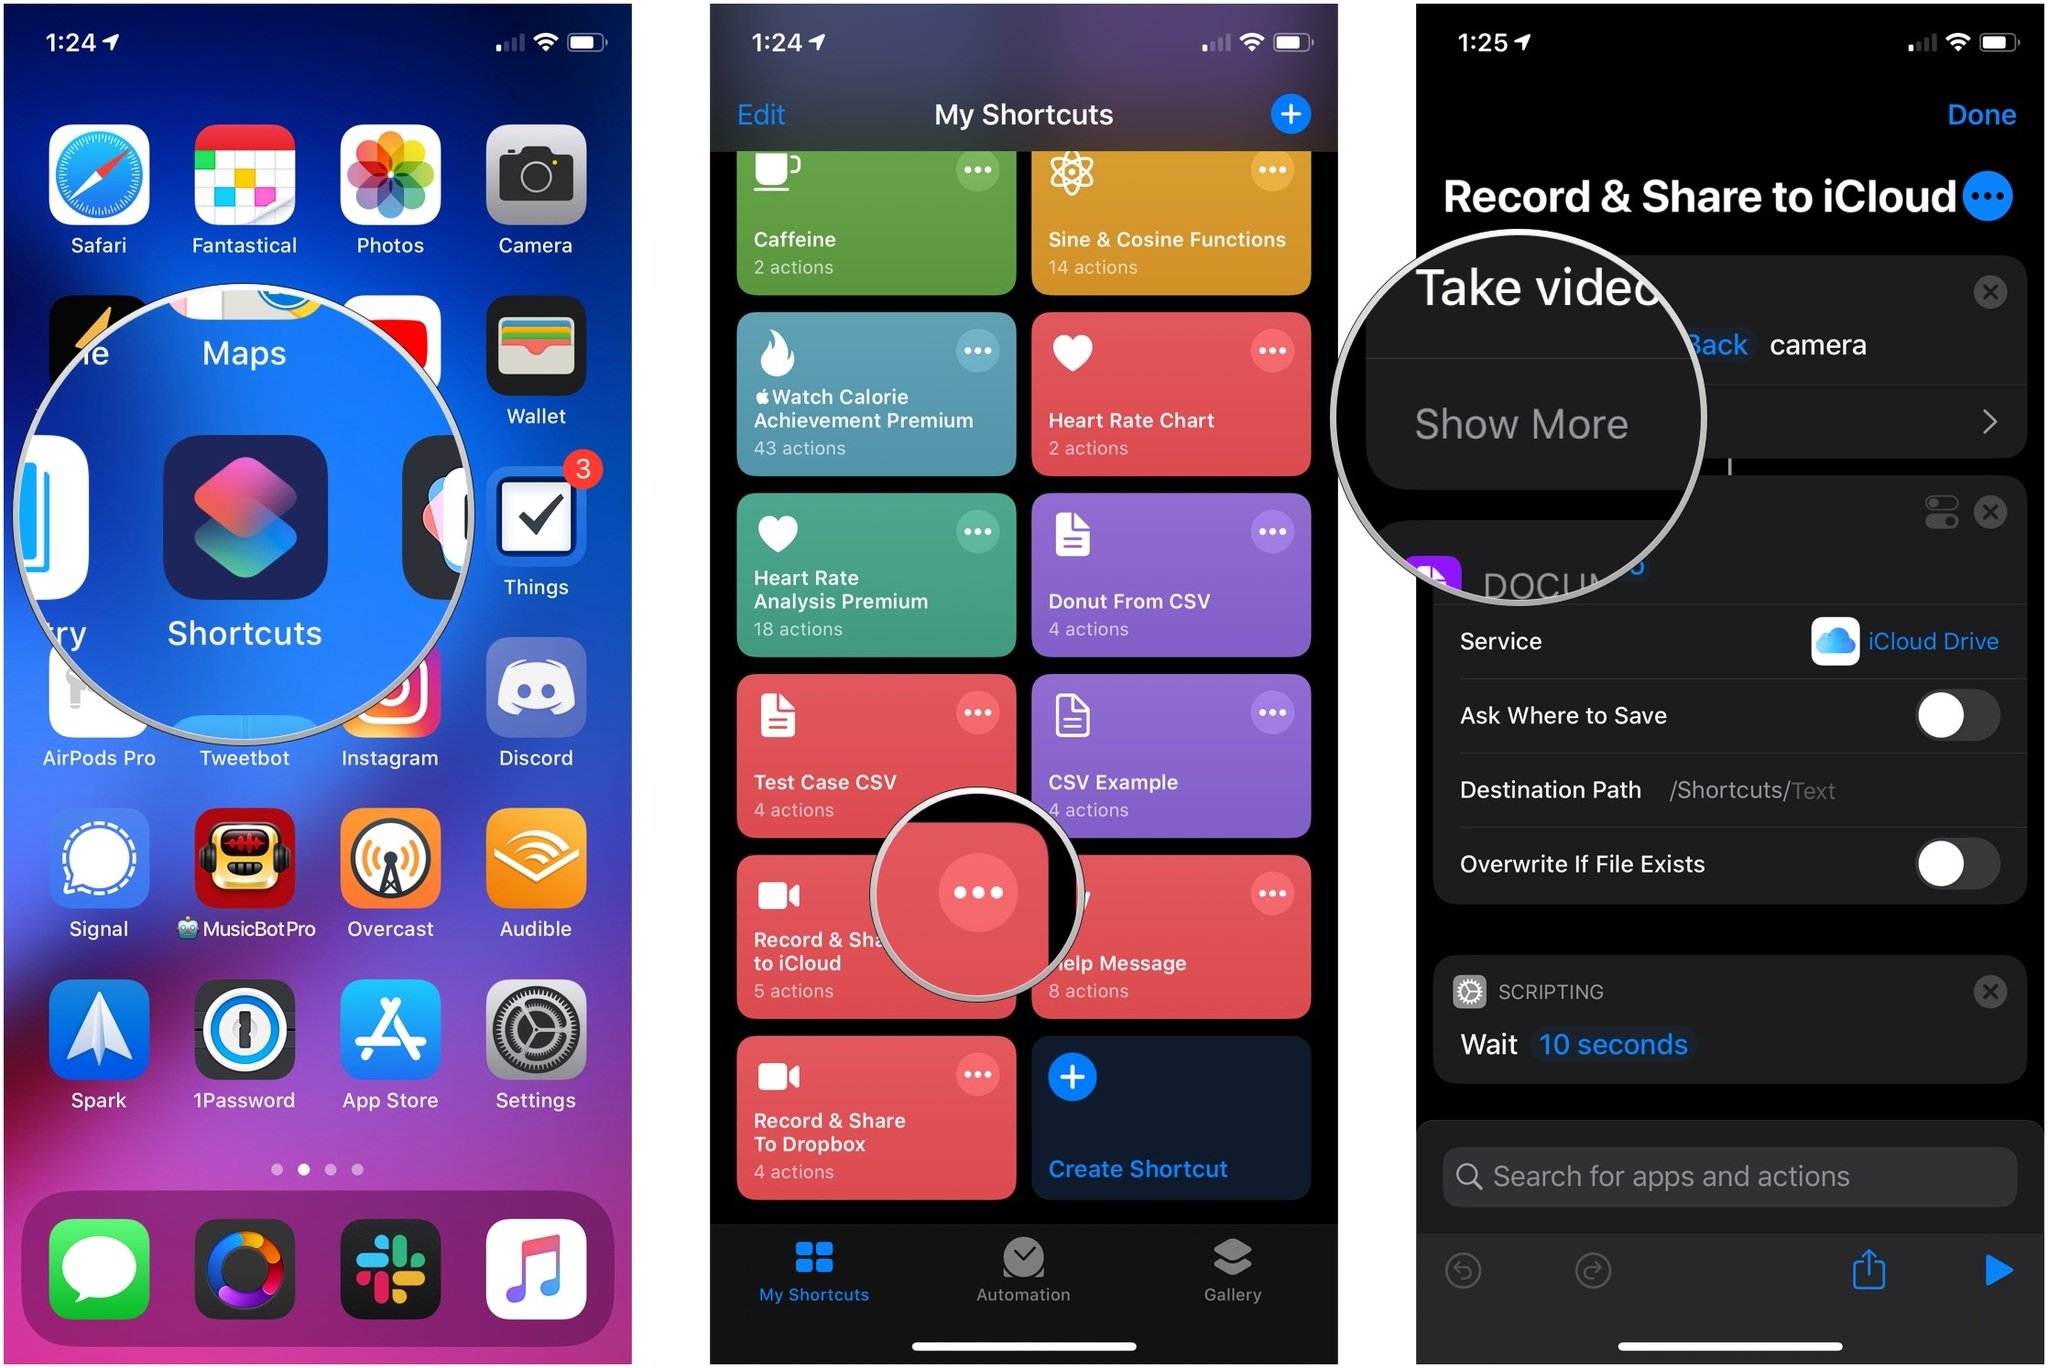 How to set up the Record & Share shortcut, showing how to open Shortcuts, tap the ... button on the shortcut, then tap Show More on the Camera action